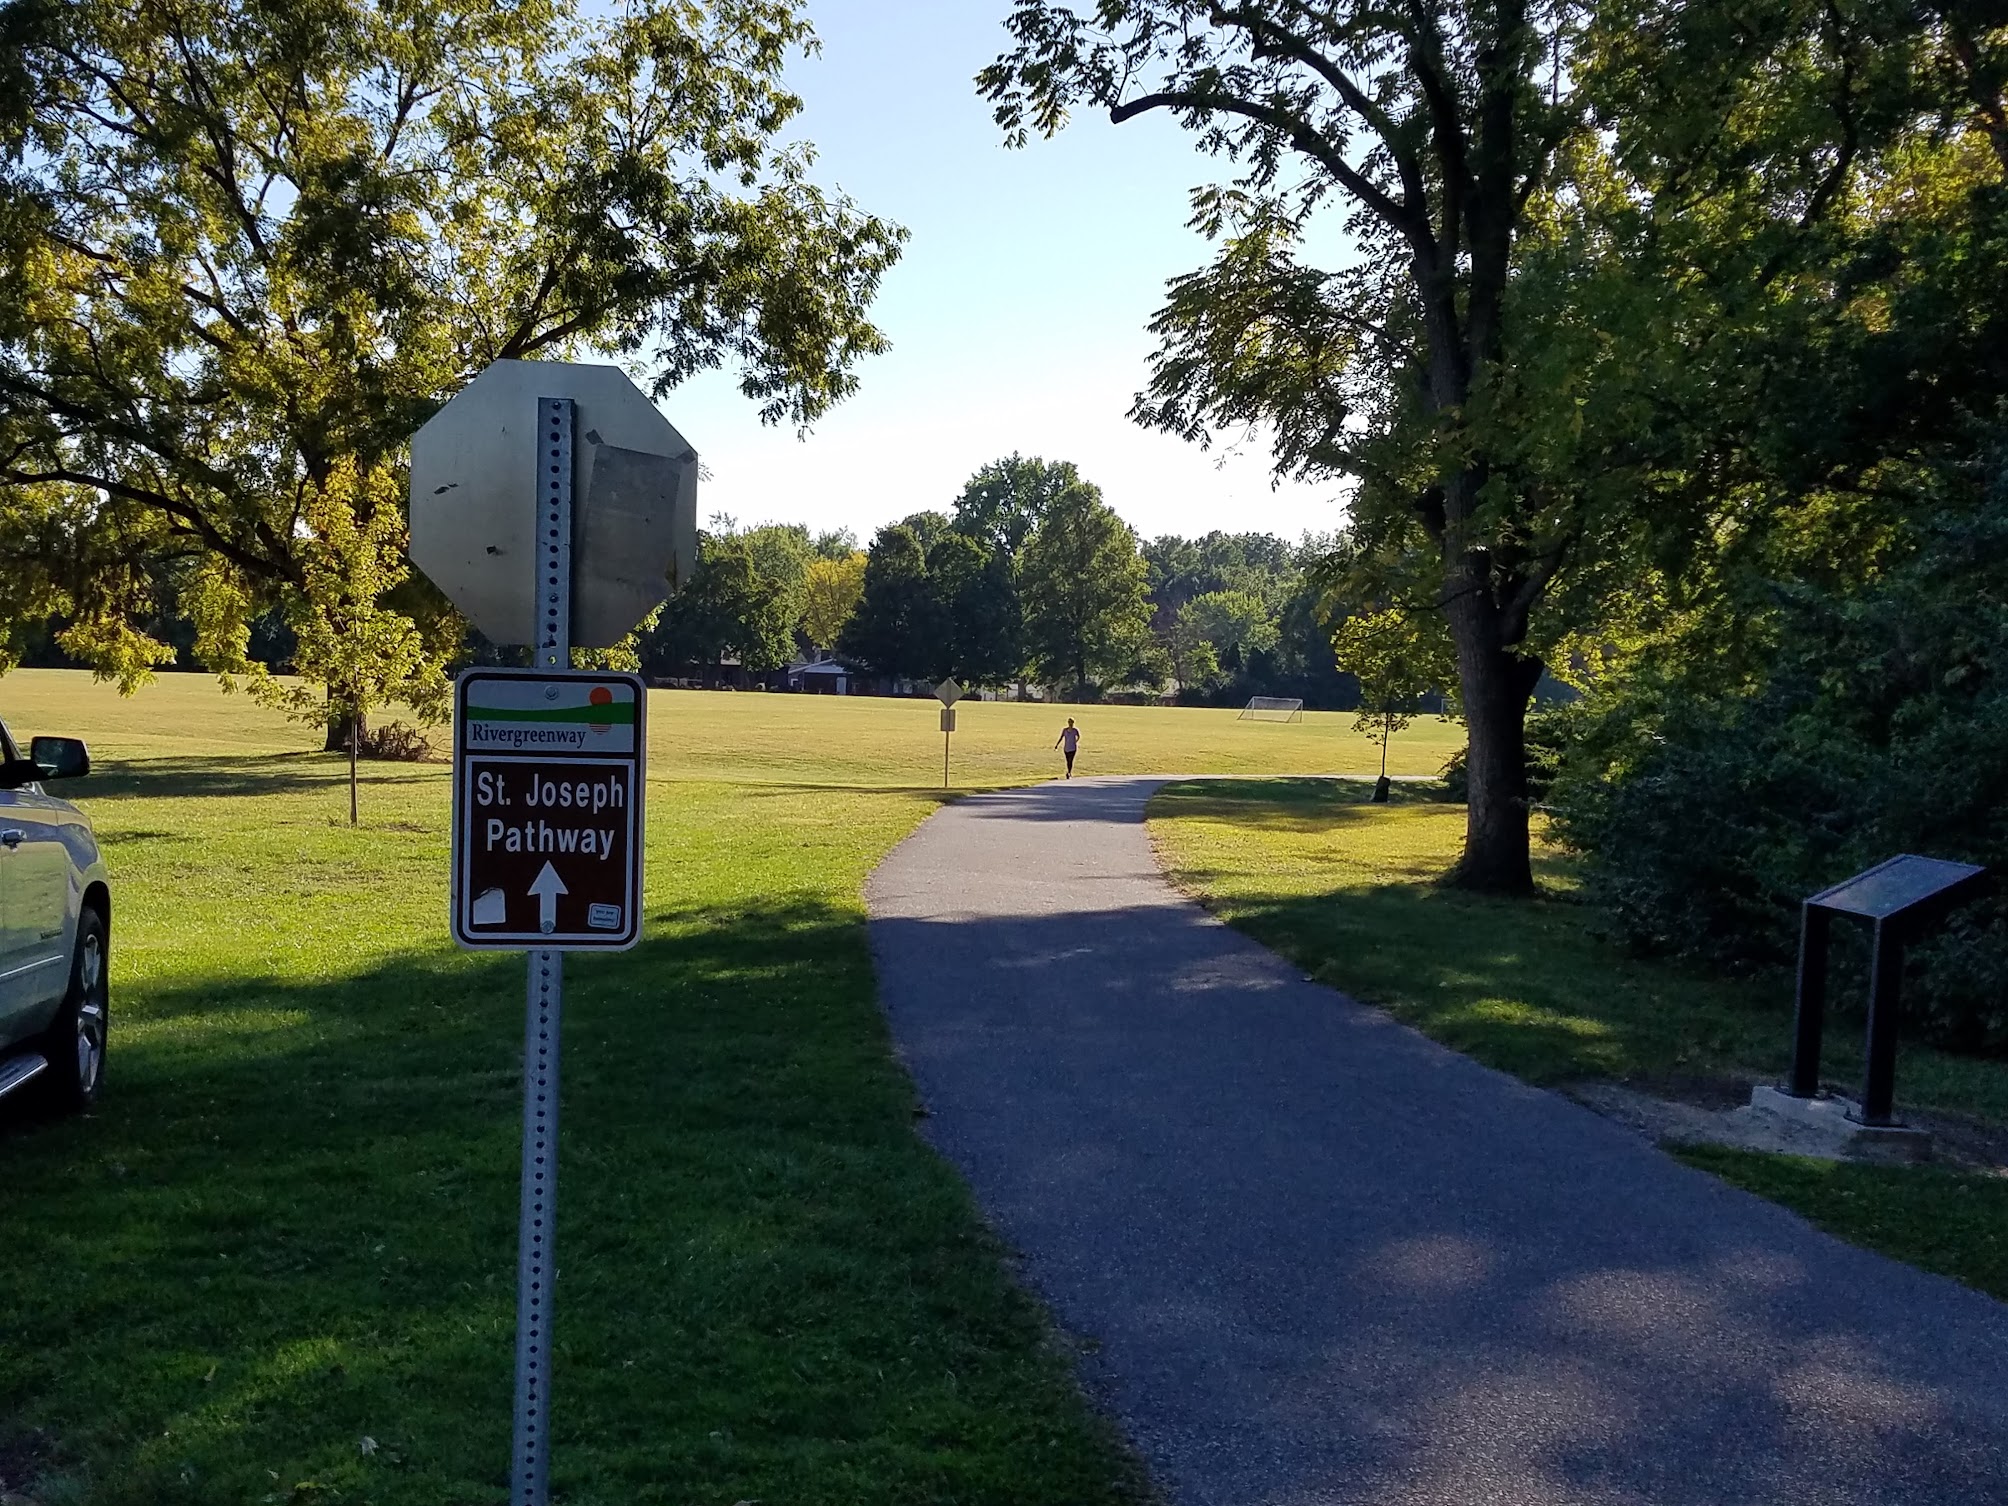 Schoaff Park to Johnny Appleseed Park